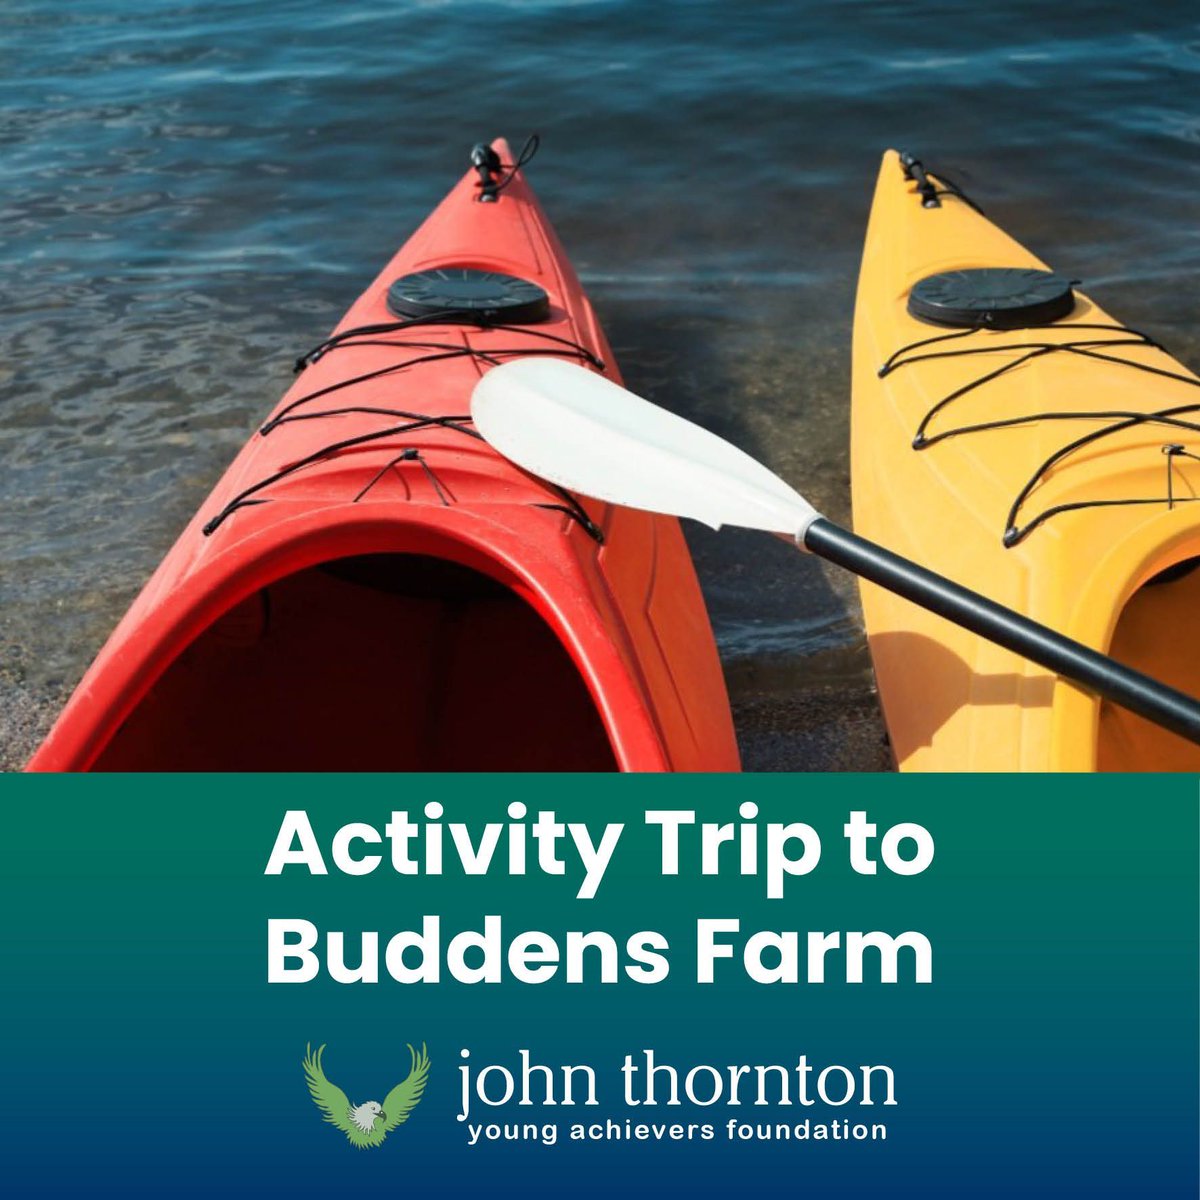 Ferndown Upper School is running an activities week where the Year 9 students will have the opportunity to take part in a Residential Trip to Buddens Farm Activity Centre. Students will be able to challenge themselves with various activities 🚣‍♀️ buff.ly/494Gclv